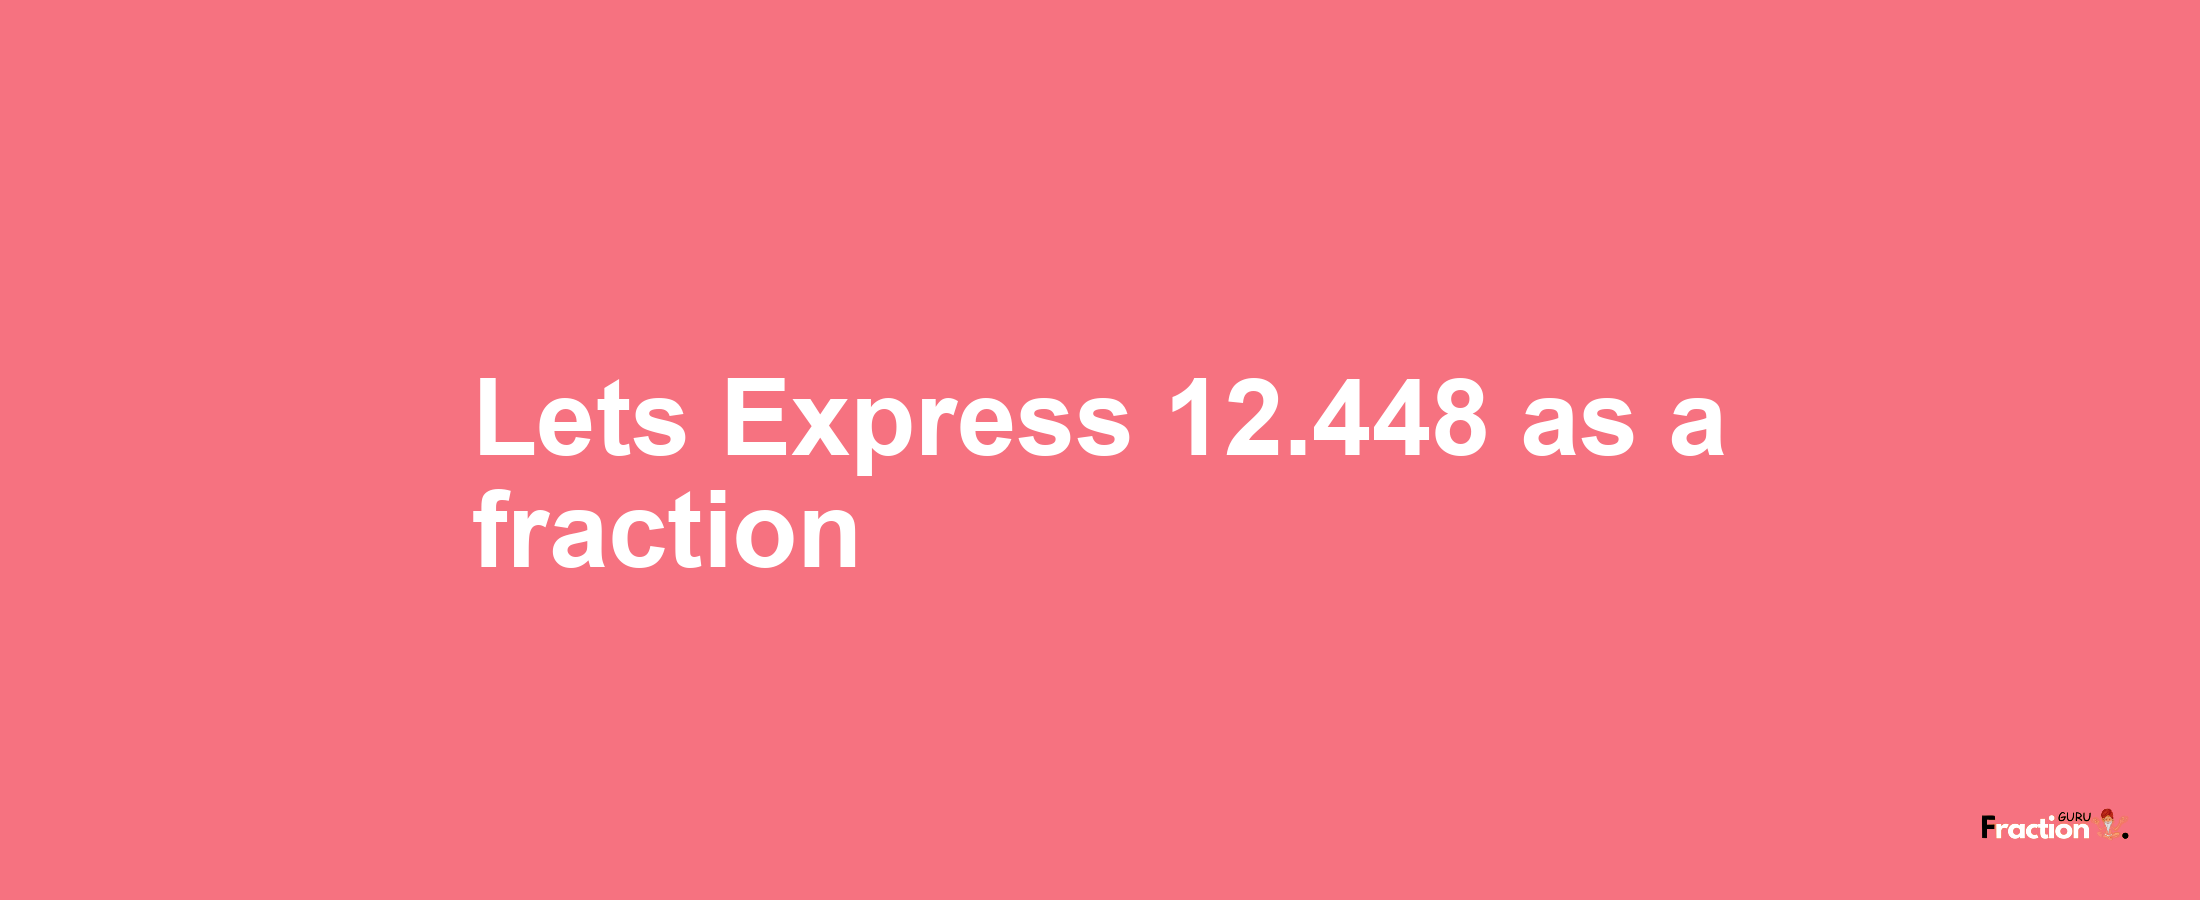 Lets Express 12.448 as afraction